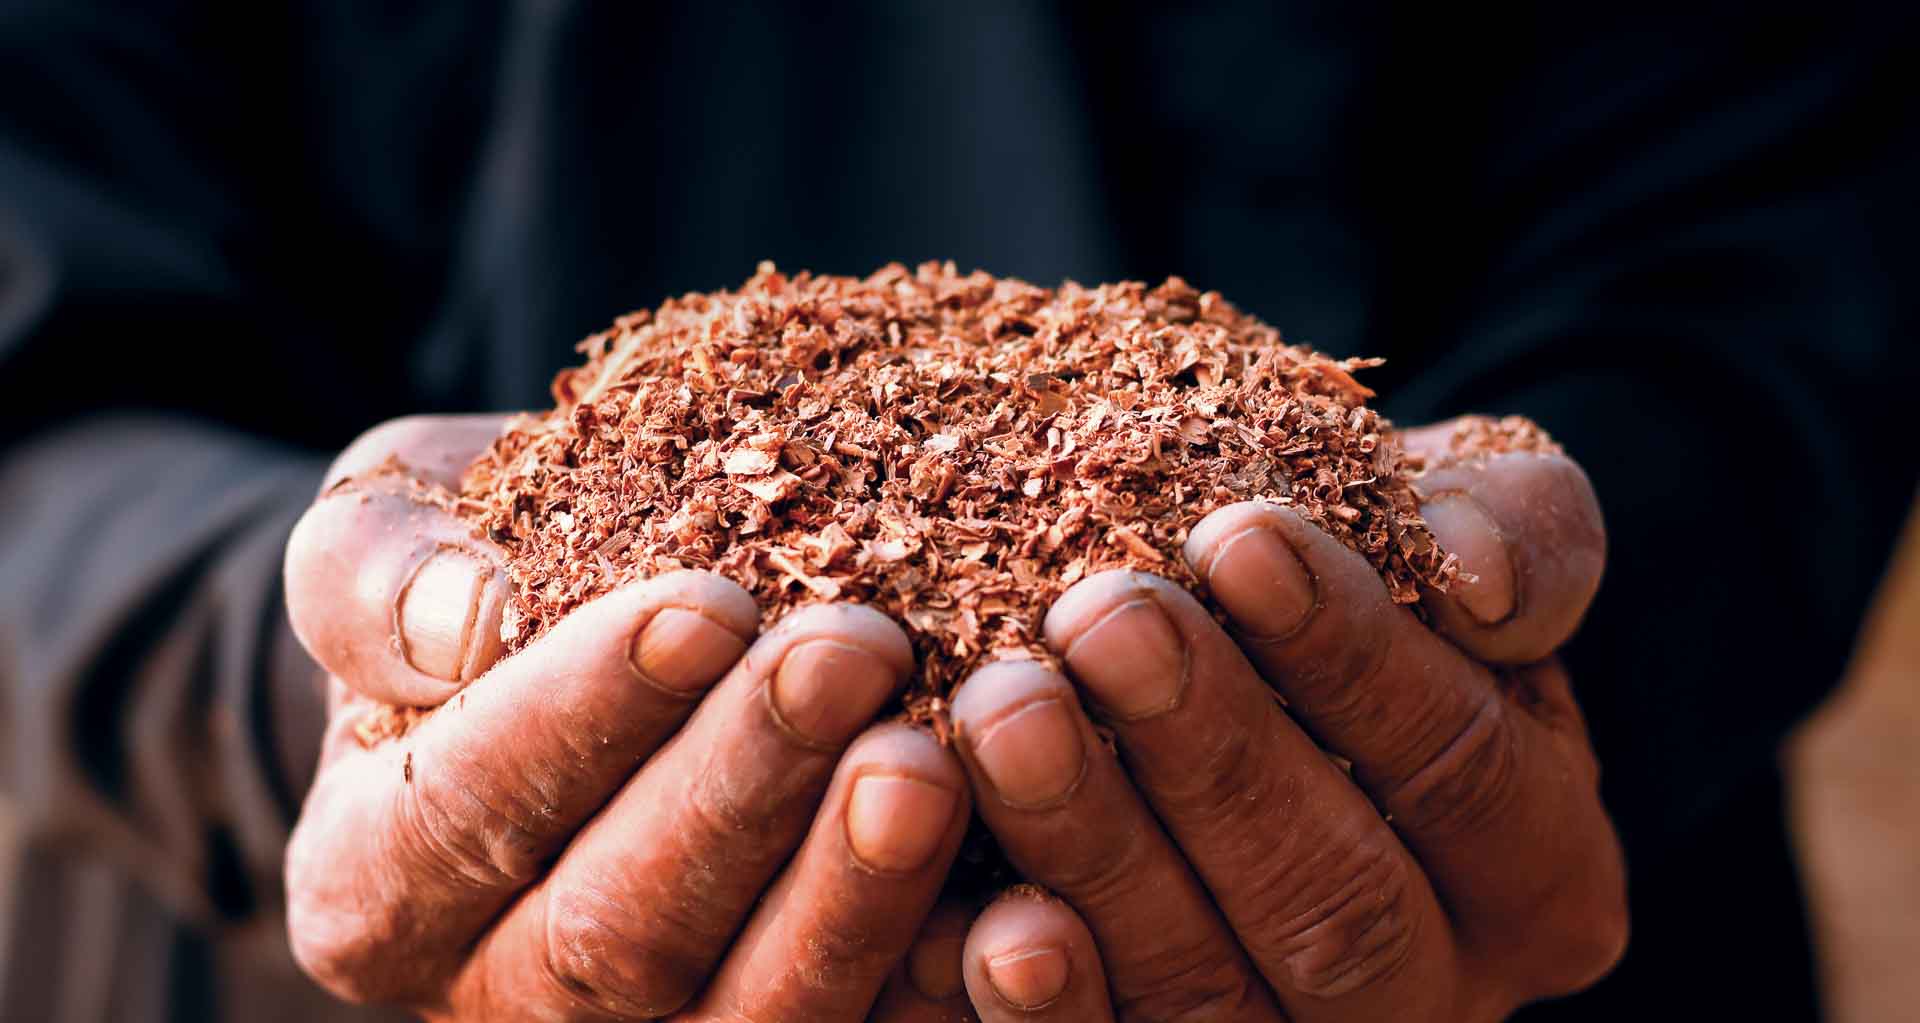 Close-up image of weathered working hands cupped together holding finely chopped wood mulch.